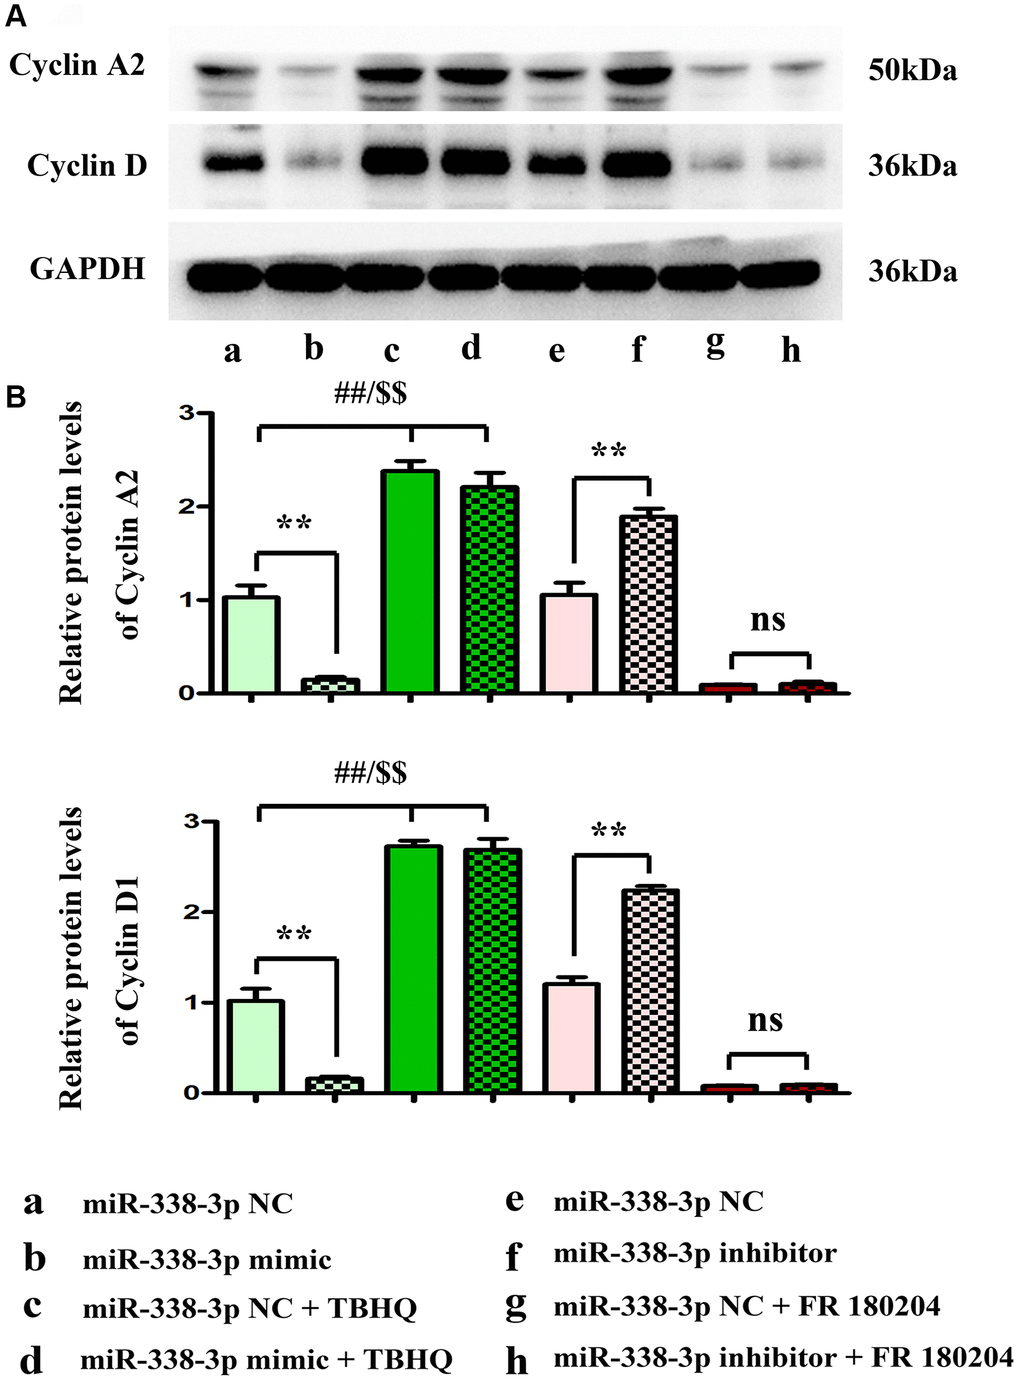 miR-338-3p modulates the proliferation of A549 cells by regulating the expression of cyclin A2 and cyclin D1, and these results are dependent on the ERK1/2 phosphorylation. (A, B) **P ##P $$P 